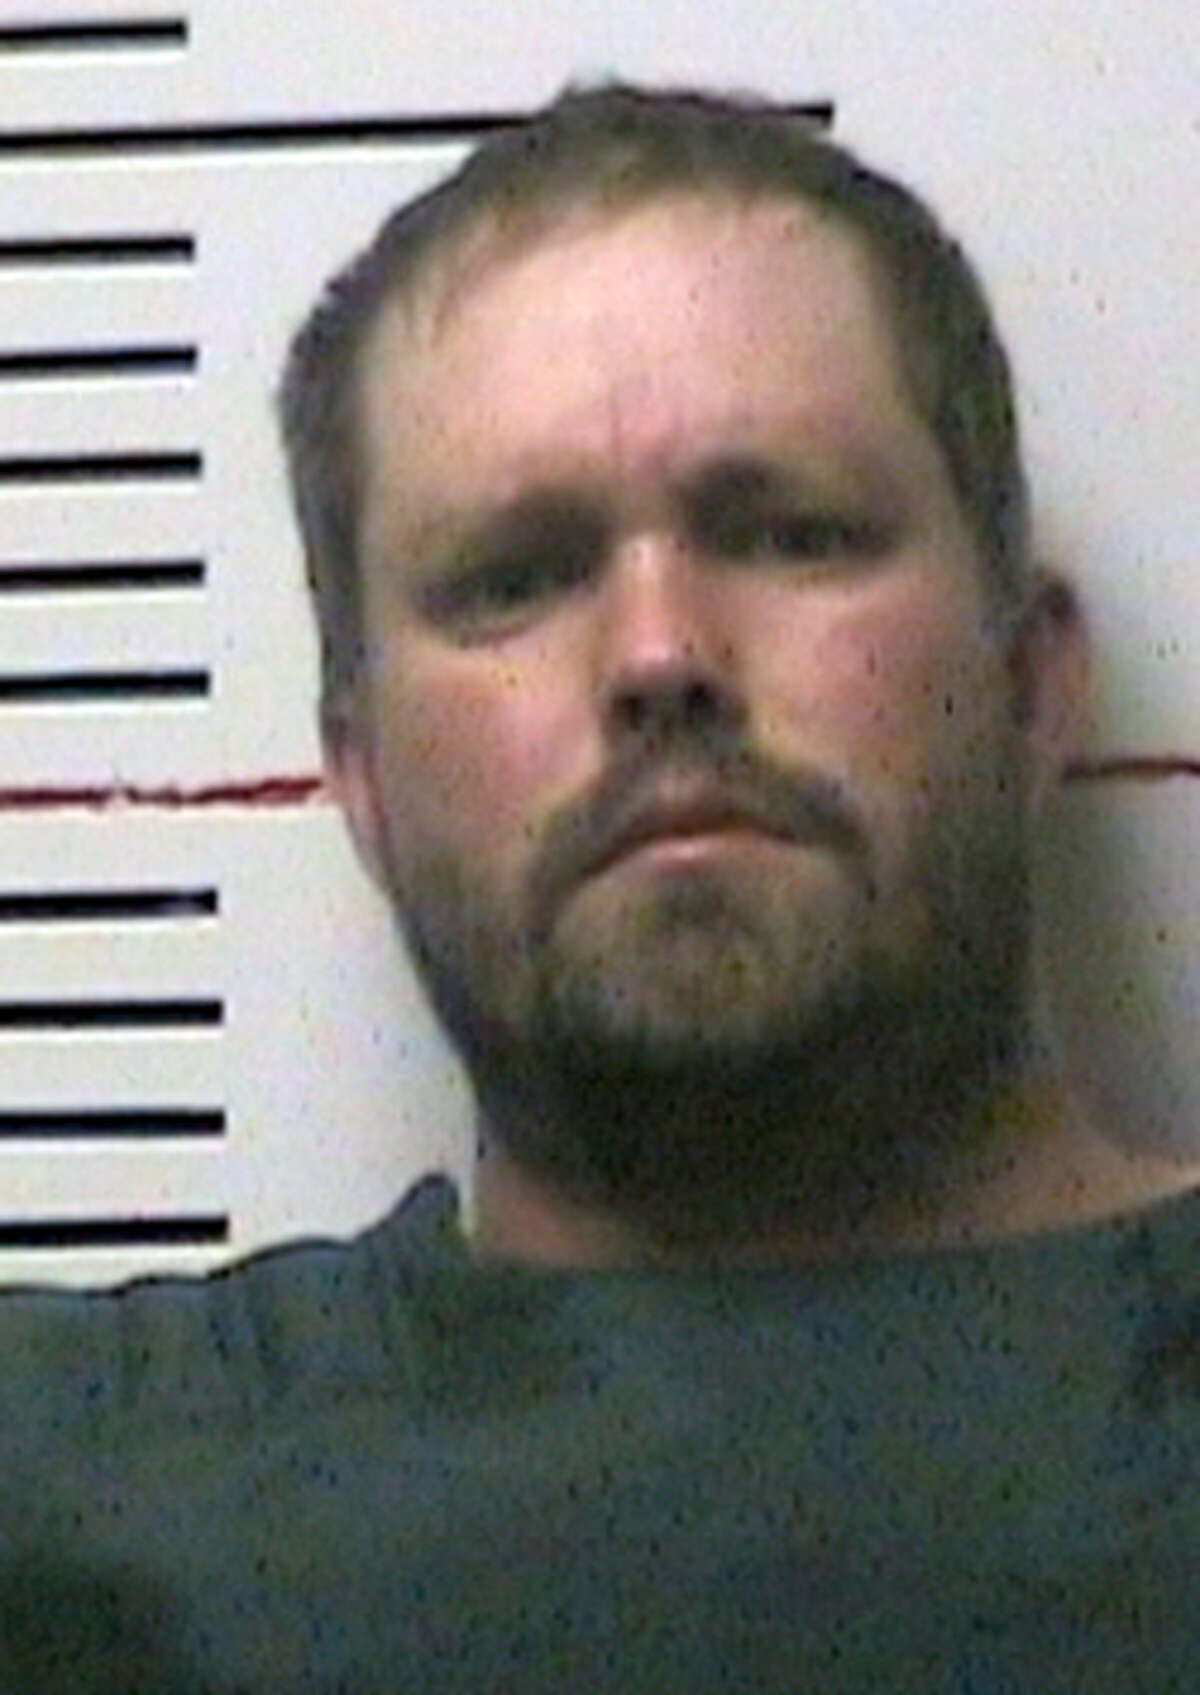 This undated photo provided by the Anderson County Sheriff's Office shows William Hudson. Anderson County Sheriff Greg Taylor said Monday, Nov. 16, 2015, that Hudson was arrested and charged in relation to the weekend homicides of multiple people at a Texas campsite. (Anderson County Sheriff's Office via AP)